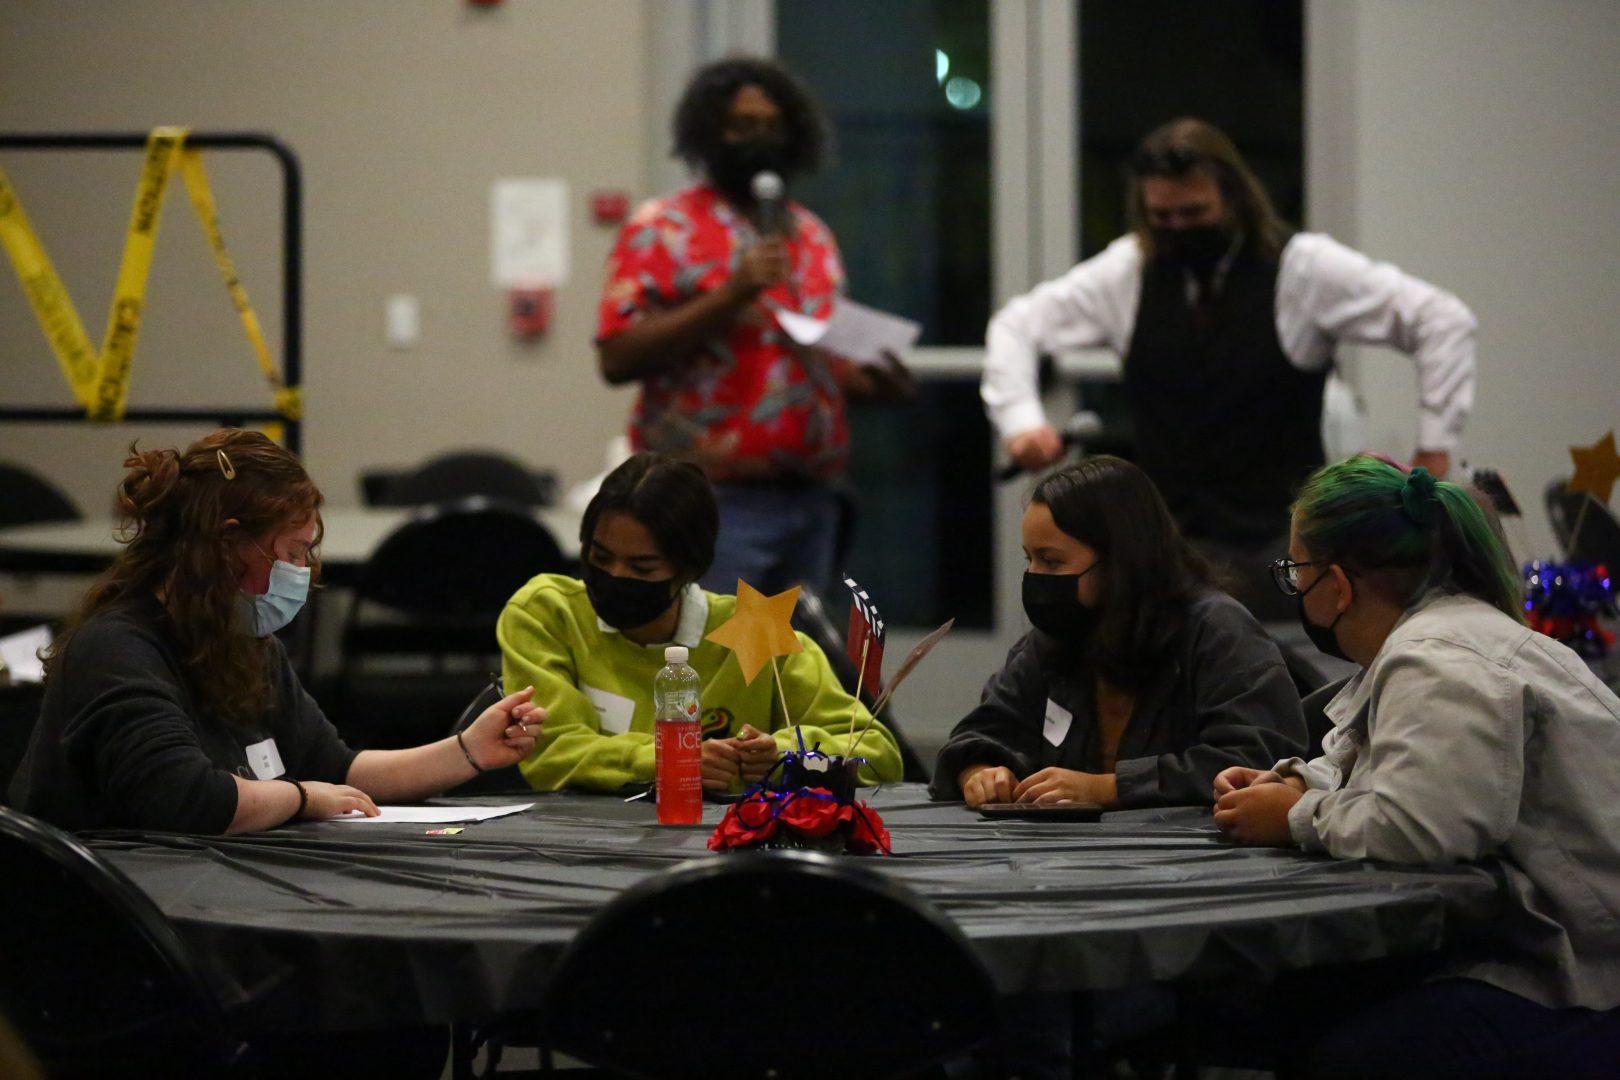 Students deliberate together during the Hollywood Murder Mystery event hosted by USU Productions in Oct. 2021. (Adam Ricardo Solis/The Collegian)